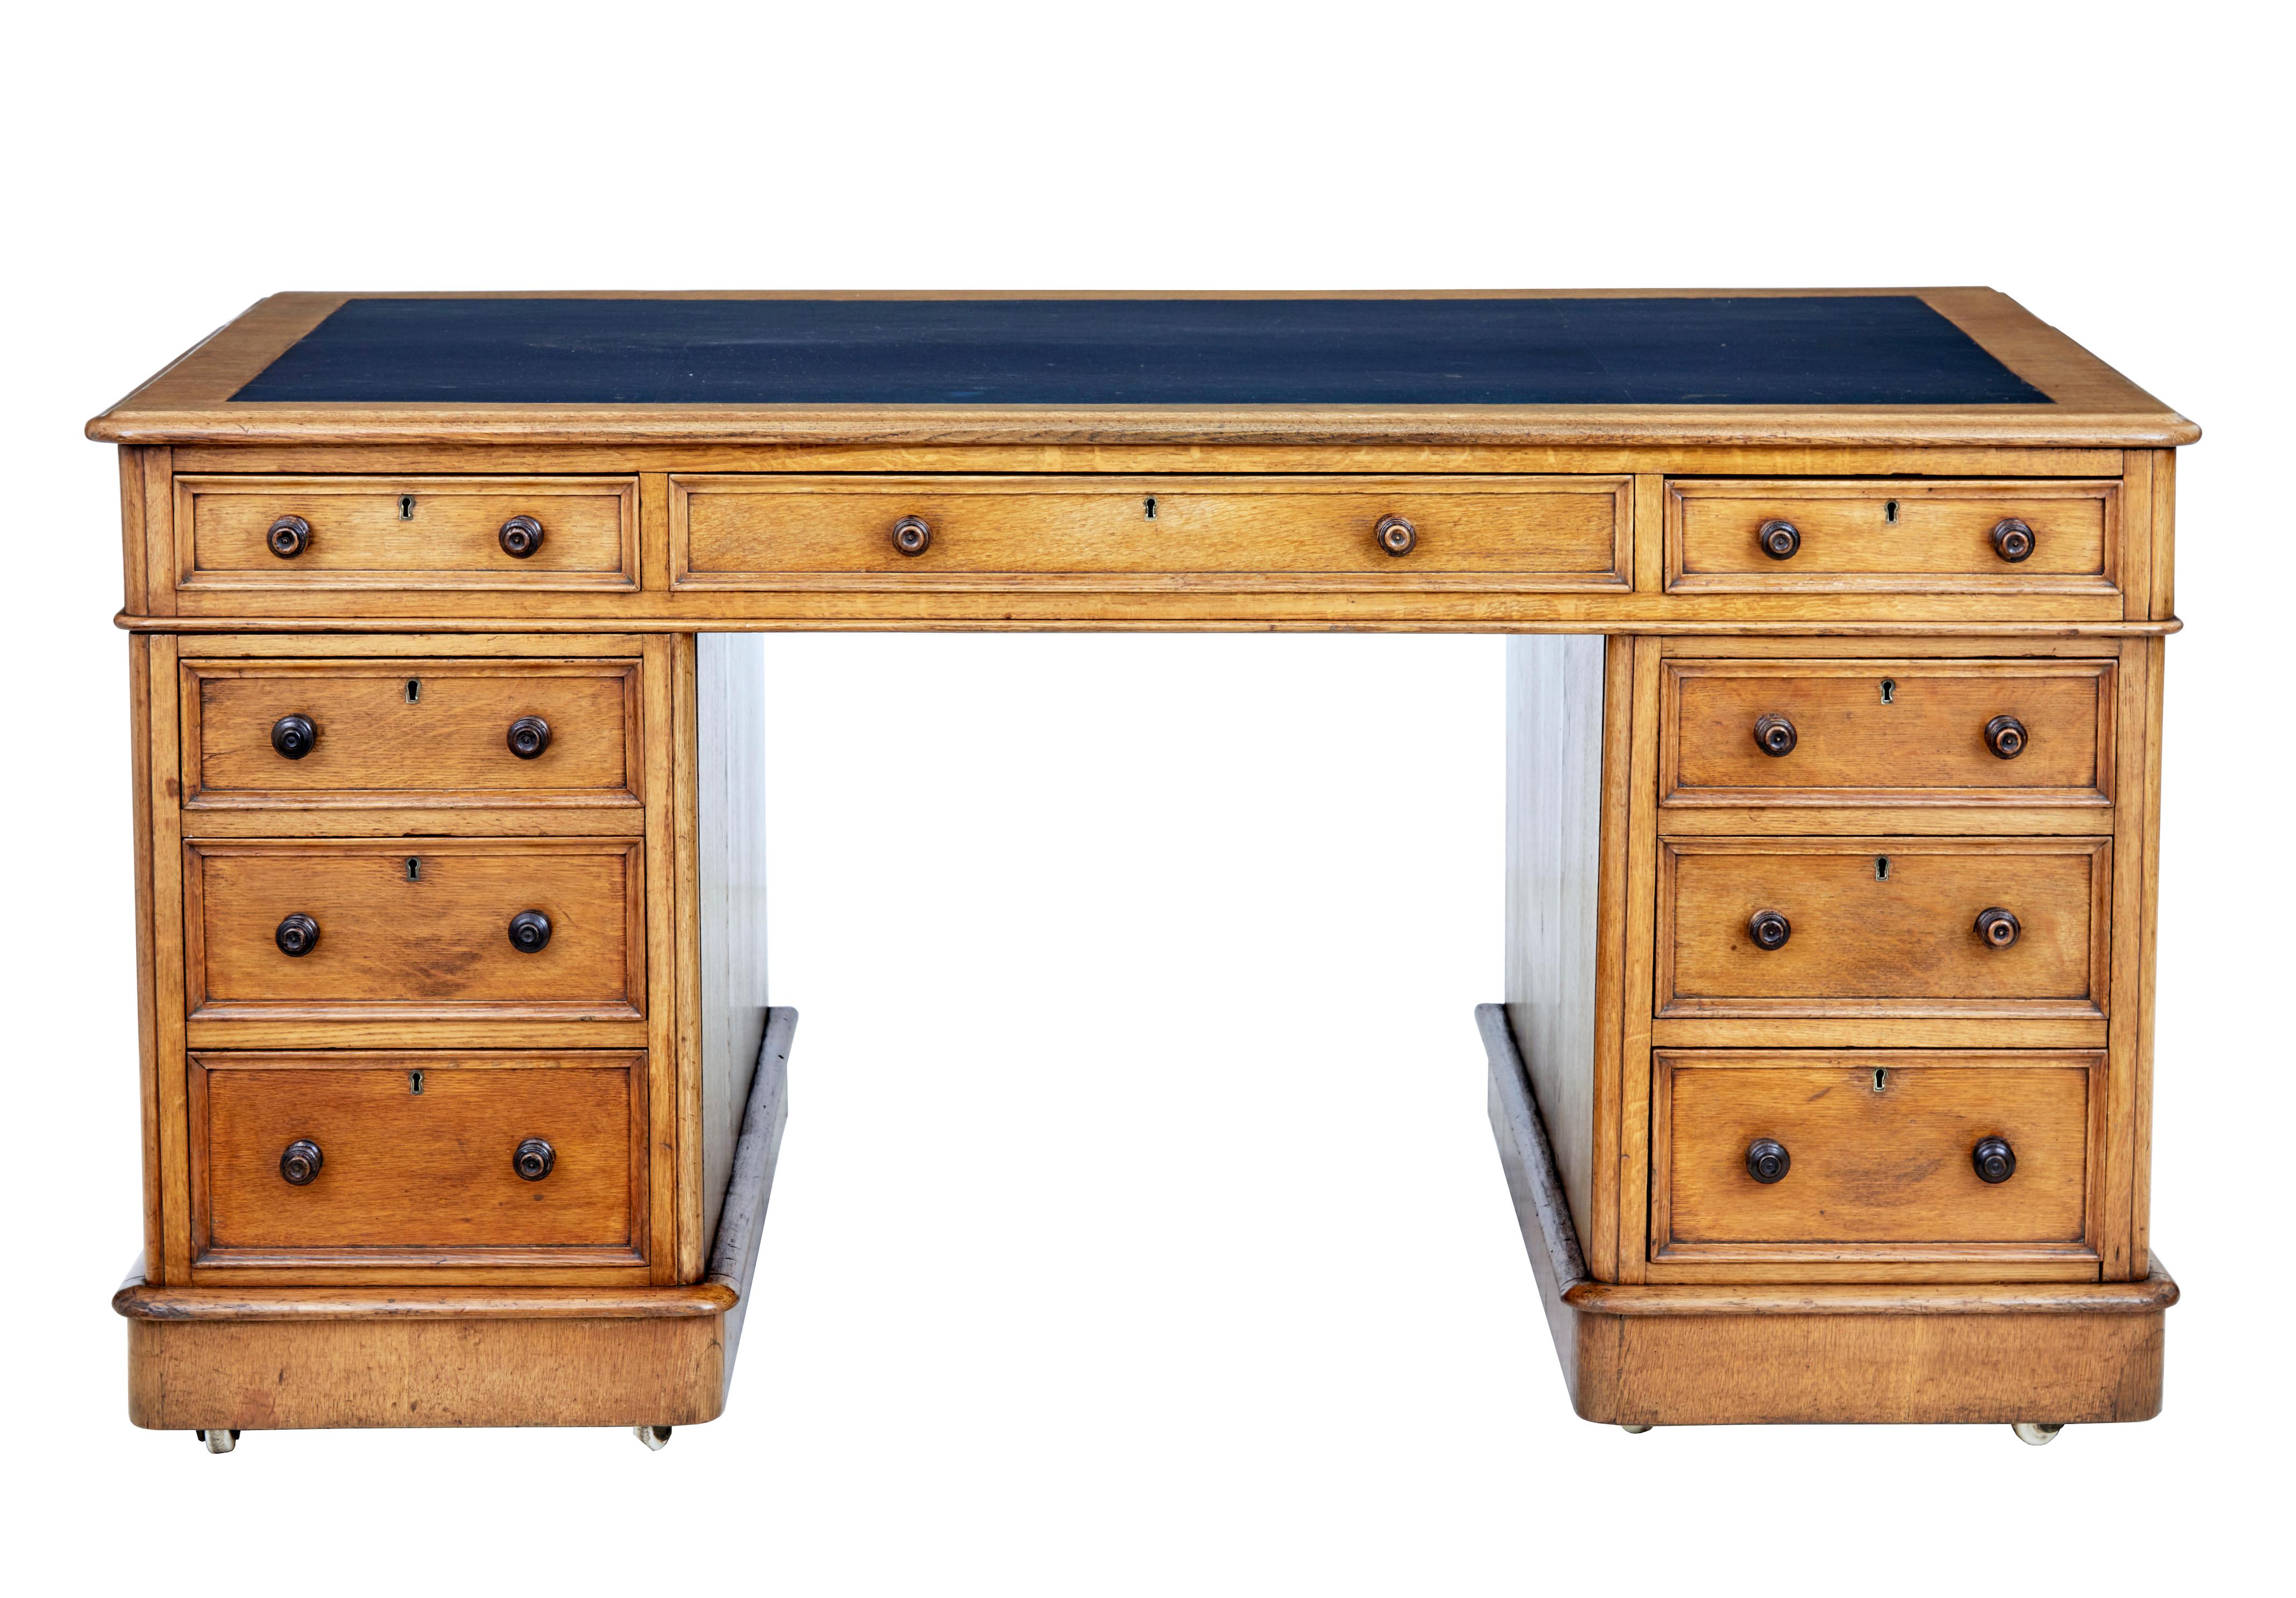 Late 19th century English oak pedestal desk, circa 1890.

Here we have a desk that was either made or retailed by London maker S&H Jewells of holborn.

3 part desk with top and a pair of pedestals. Original dark blue leather writing surface